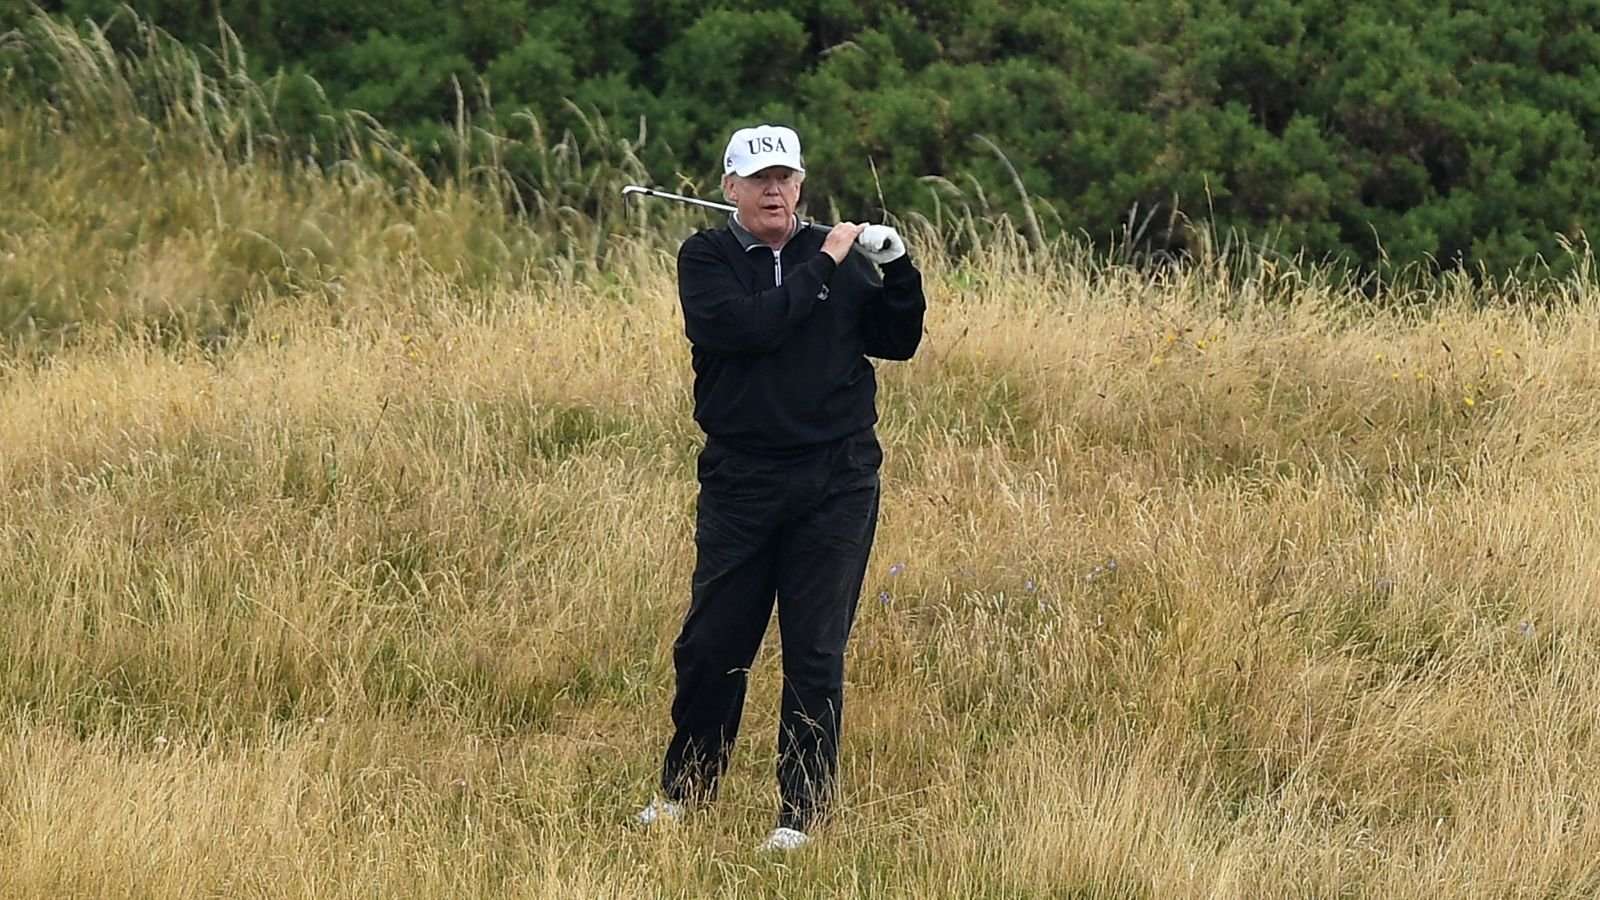 image for Trump Spent More Than Three Times the Cost of Robert Mueller’s Russia Investigation Playing Golf at His Own Resorts